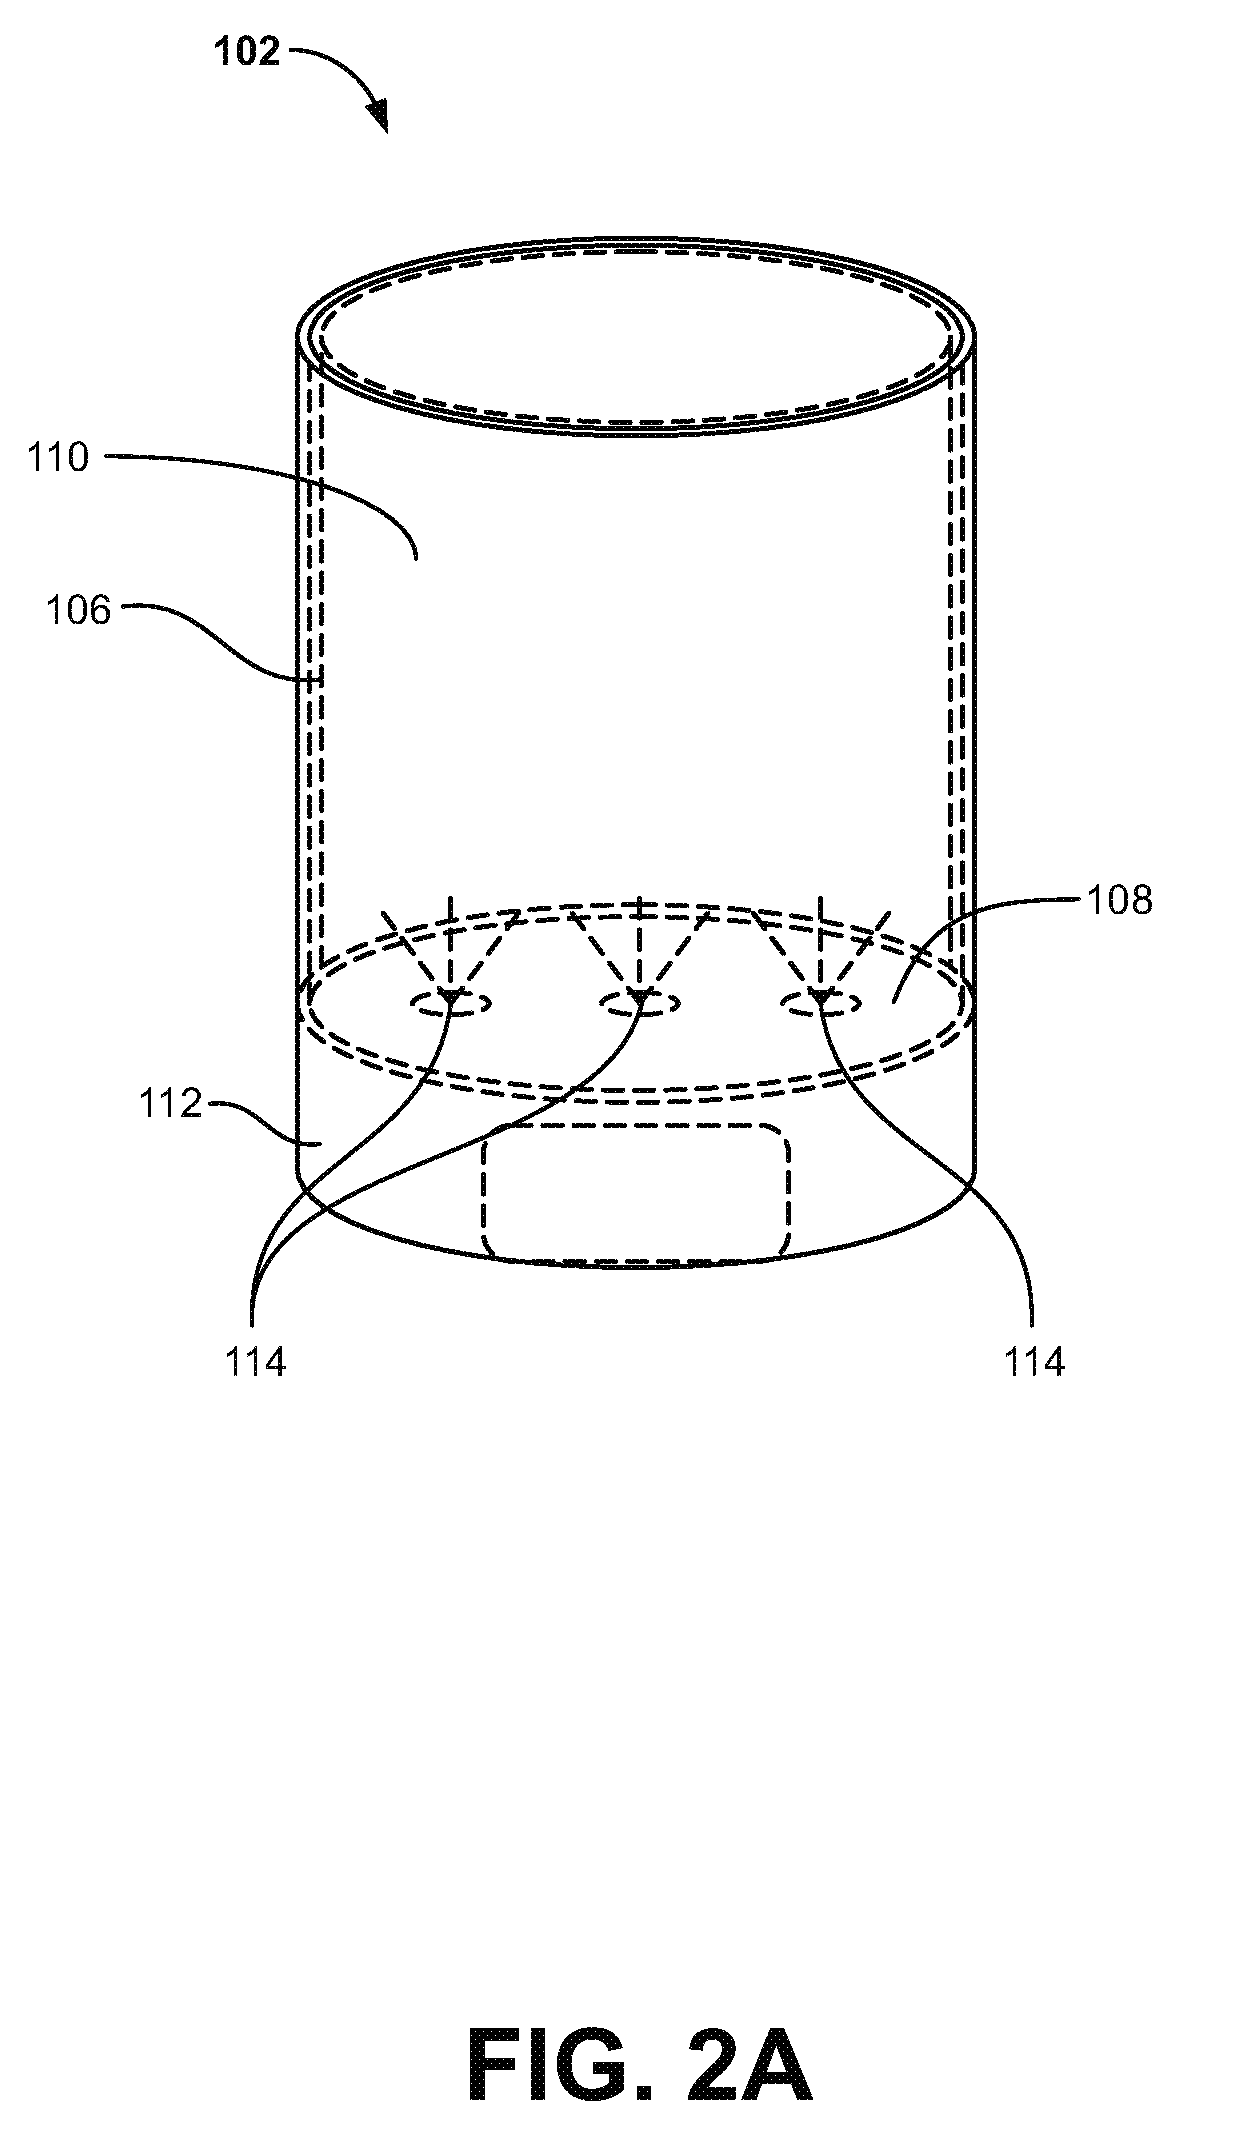 Apparatus configured for collection and sterilization of expectorates